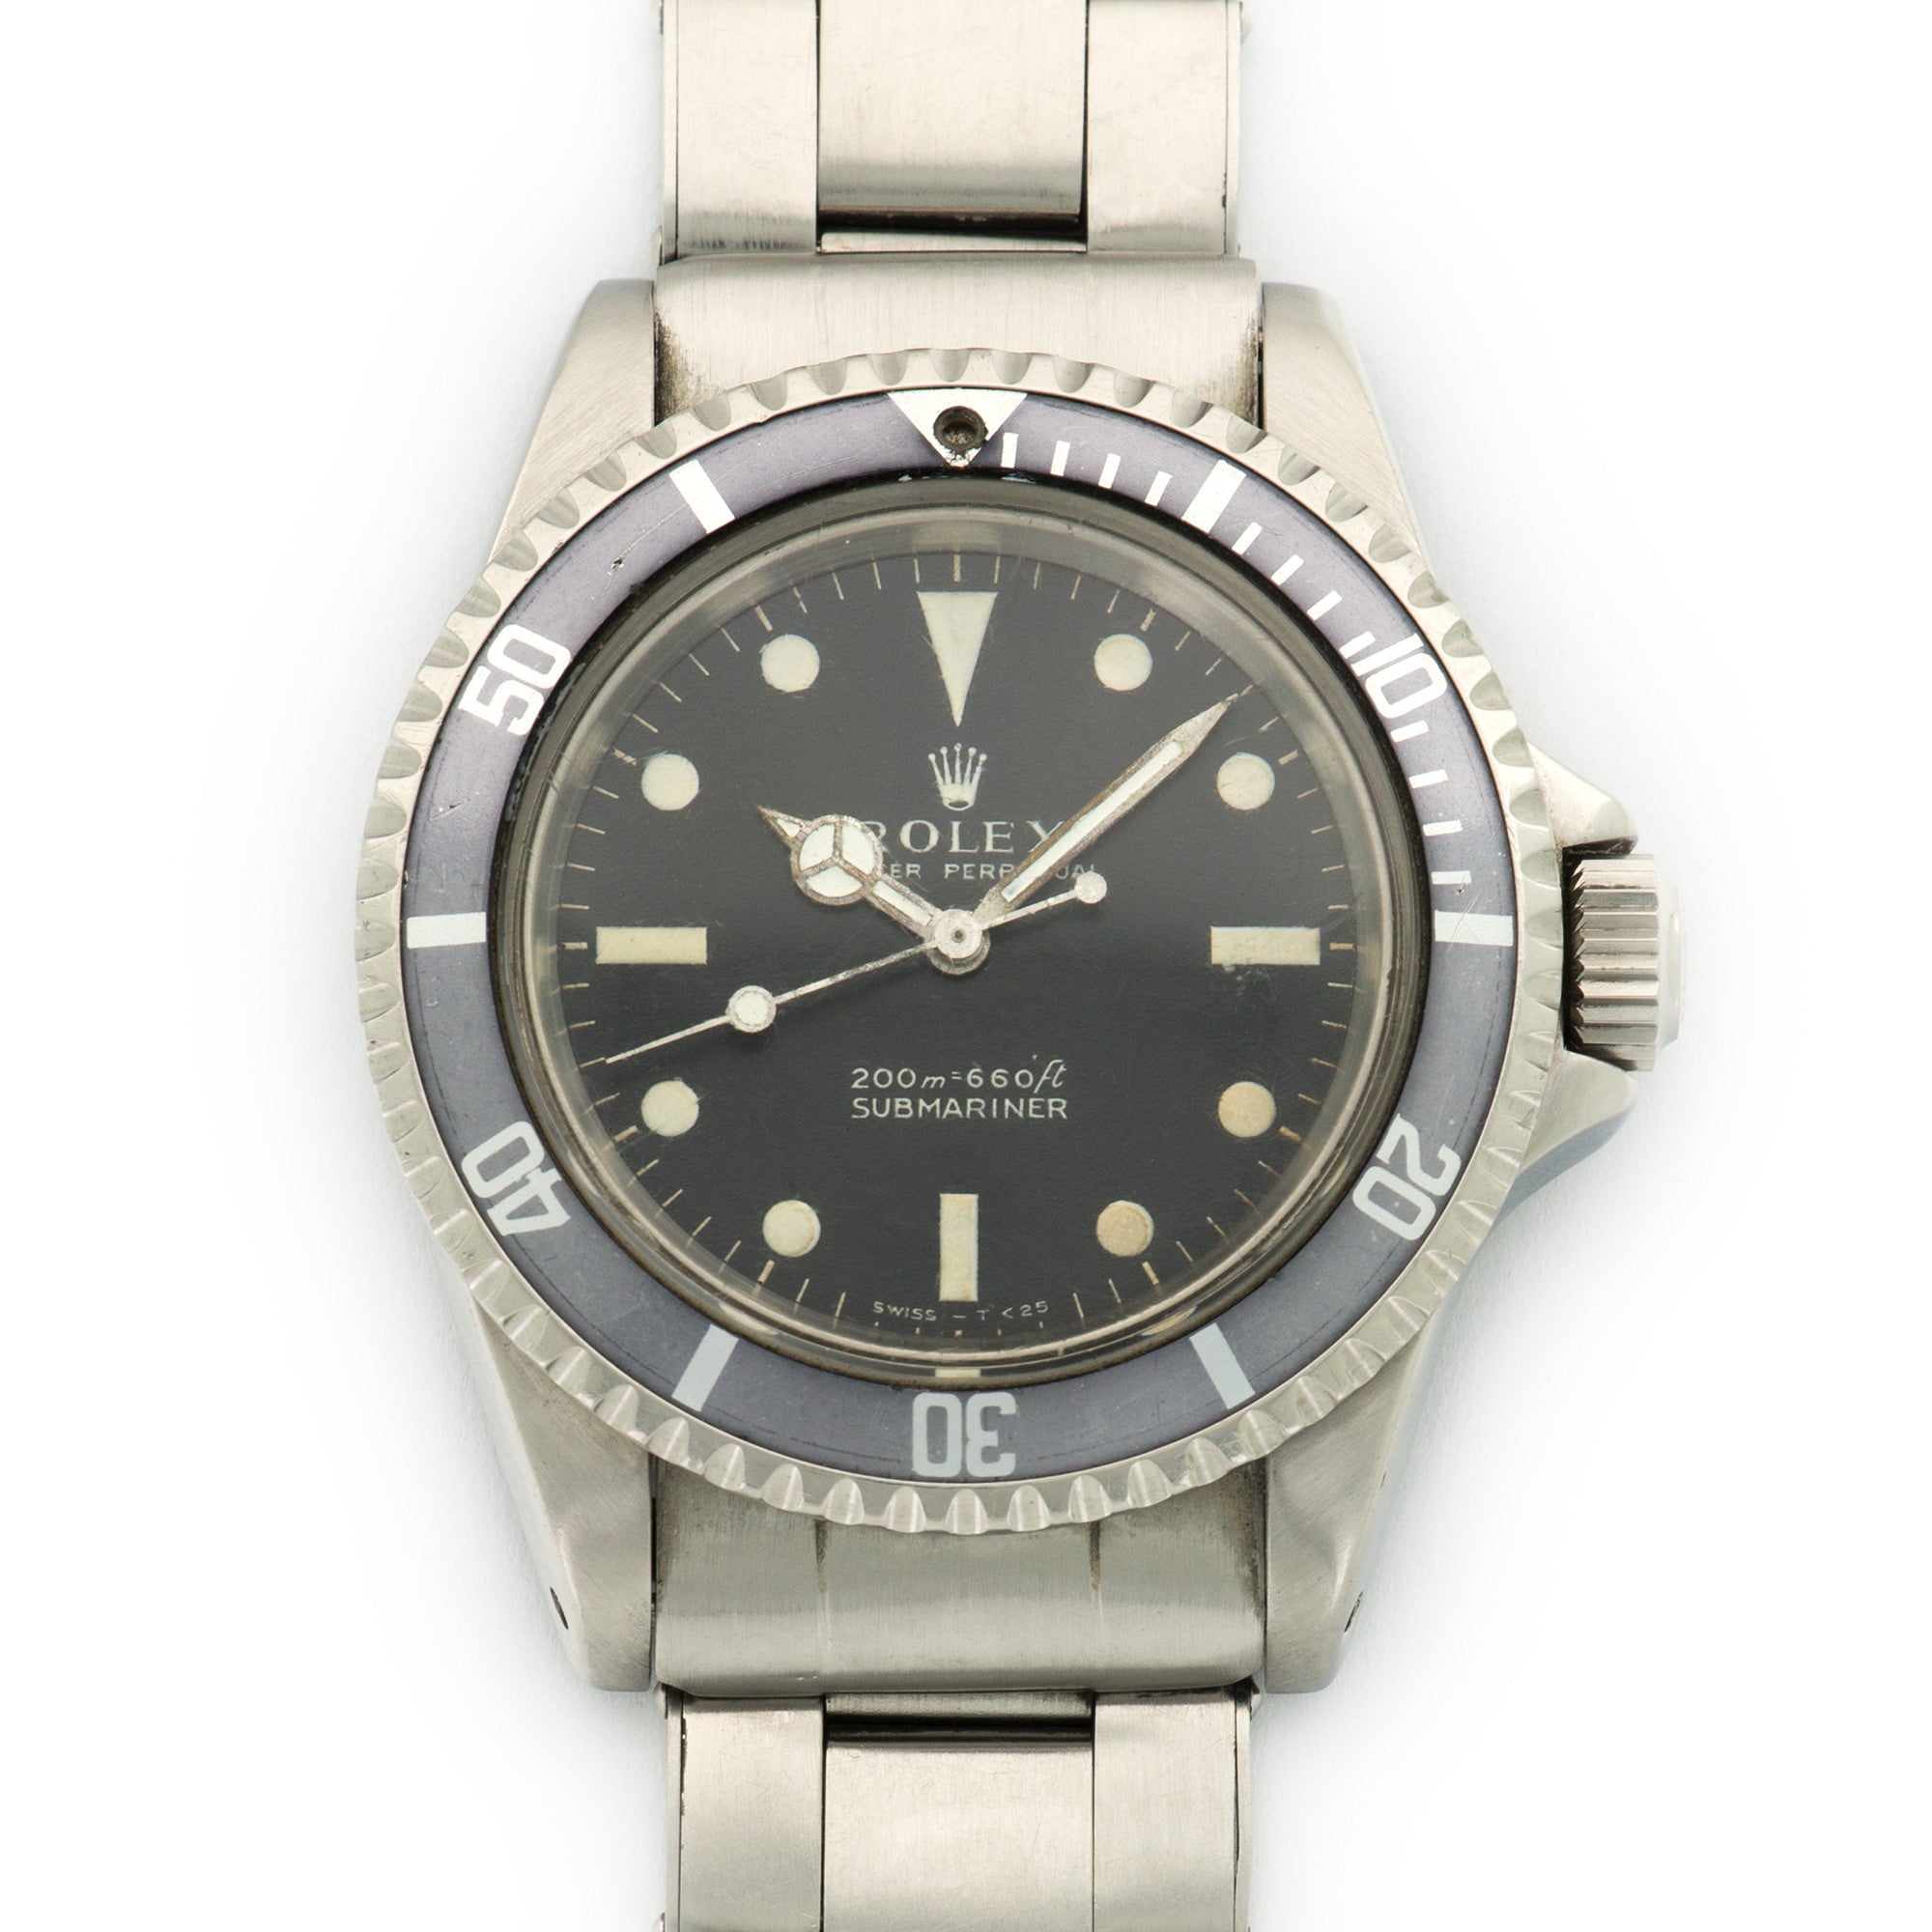 Rolex - Rolex Steel Meters-First Submariner Watch Ref. 5513 with Original Papers - The Keystone Watches